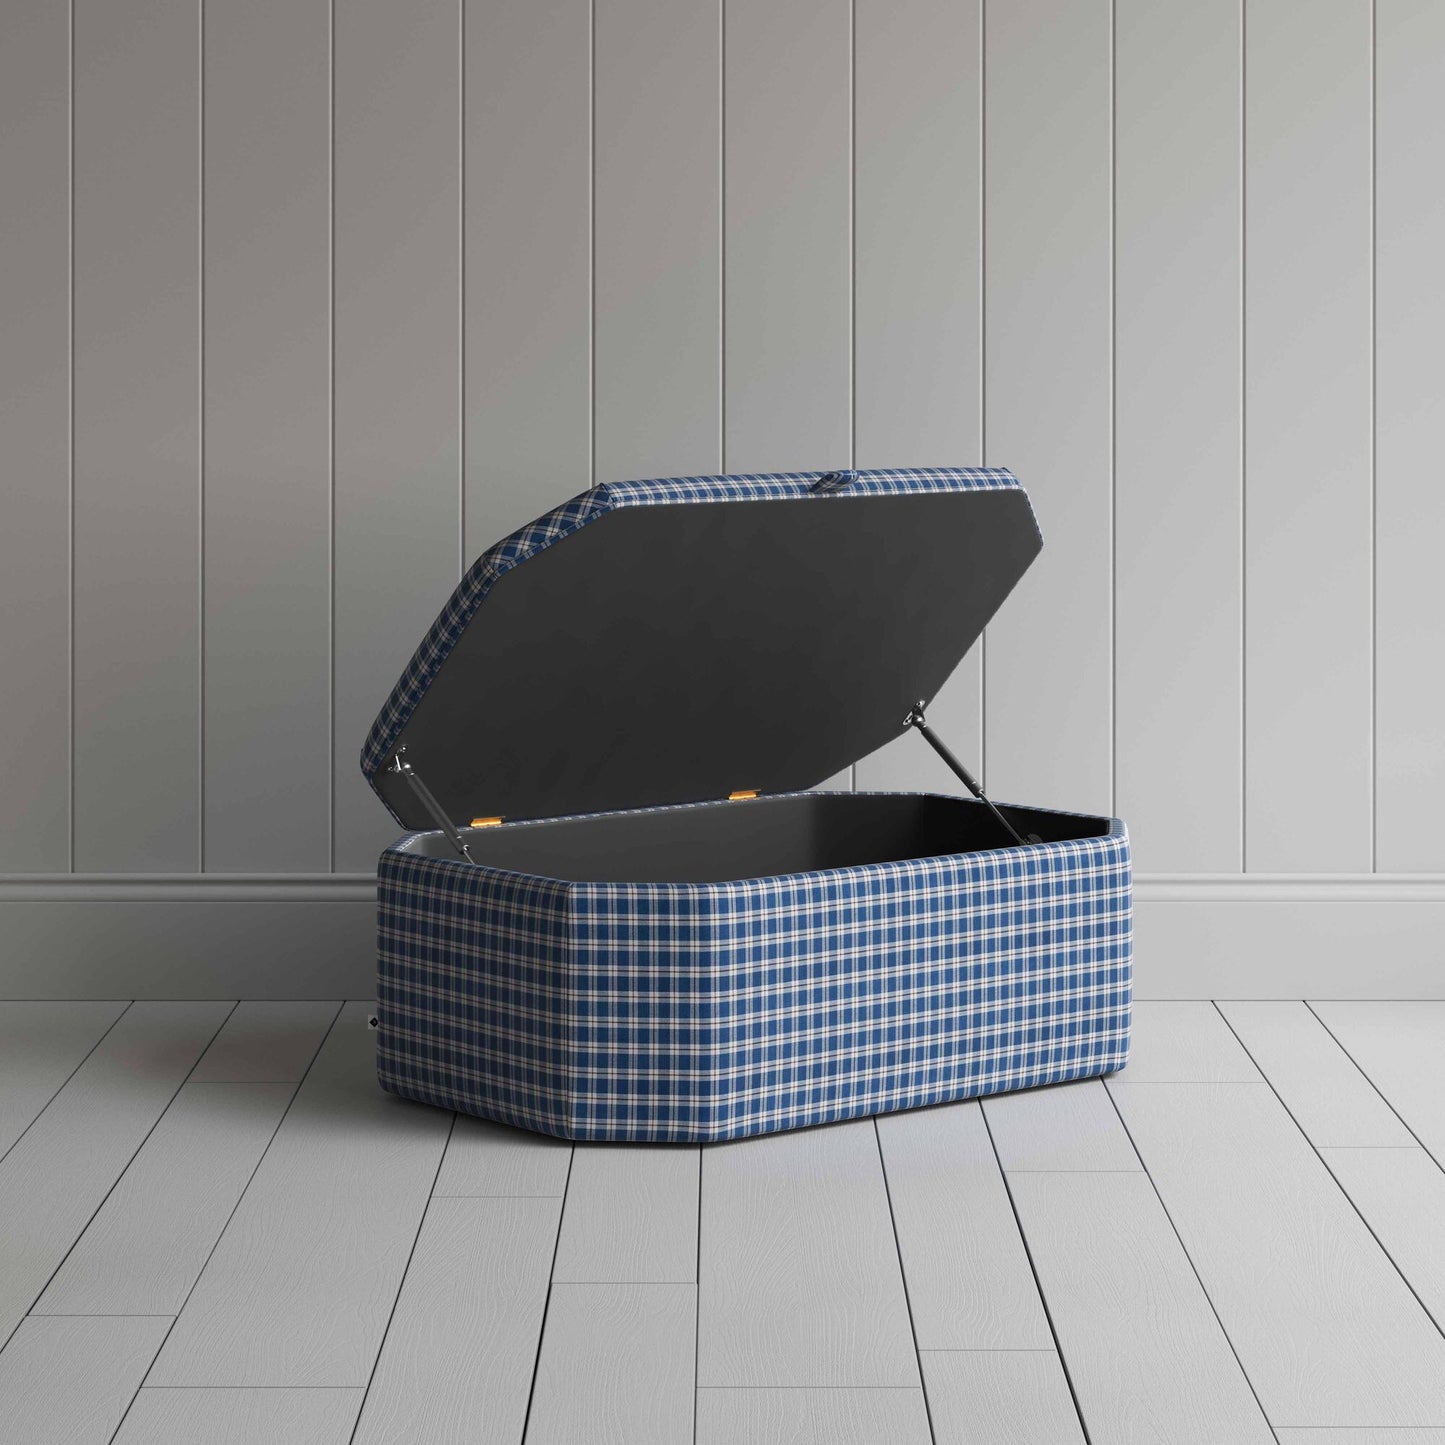 Hither Hexagonal Storage Ottoman in Well Plaid Cotton, Blue Brown